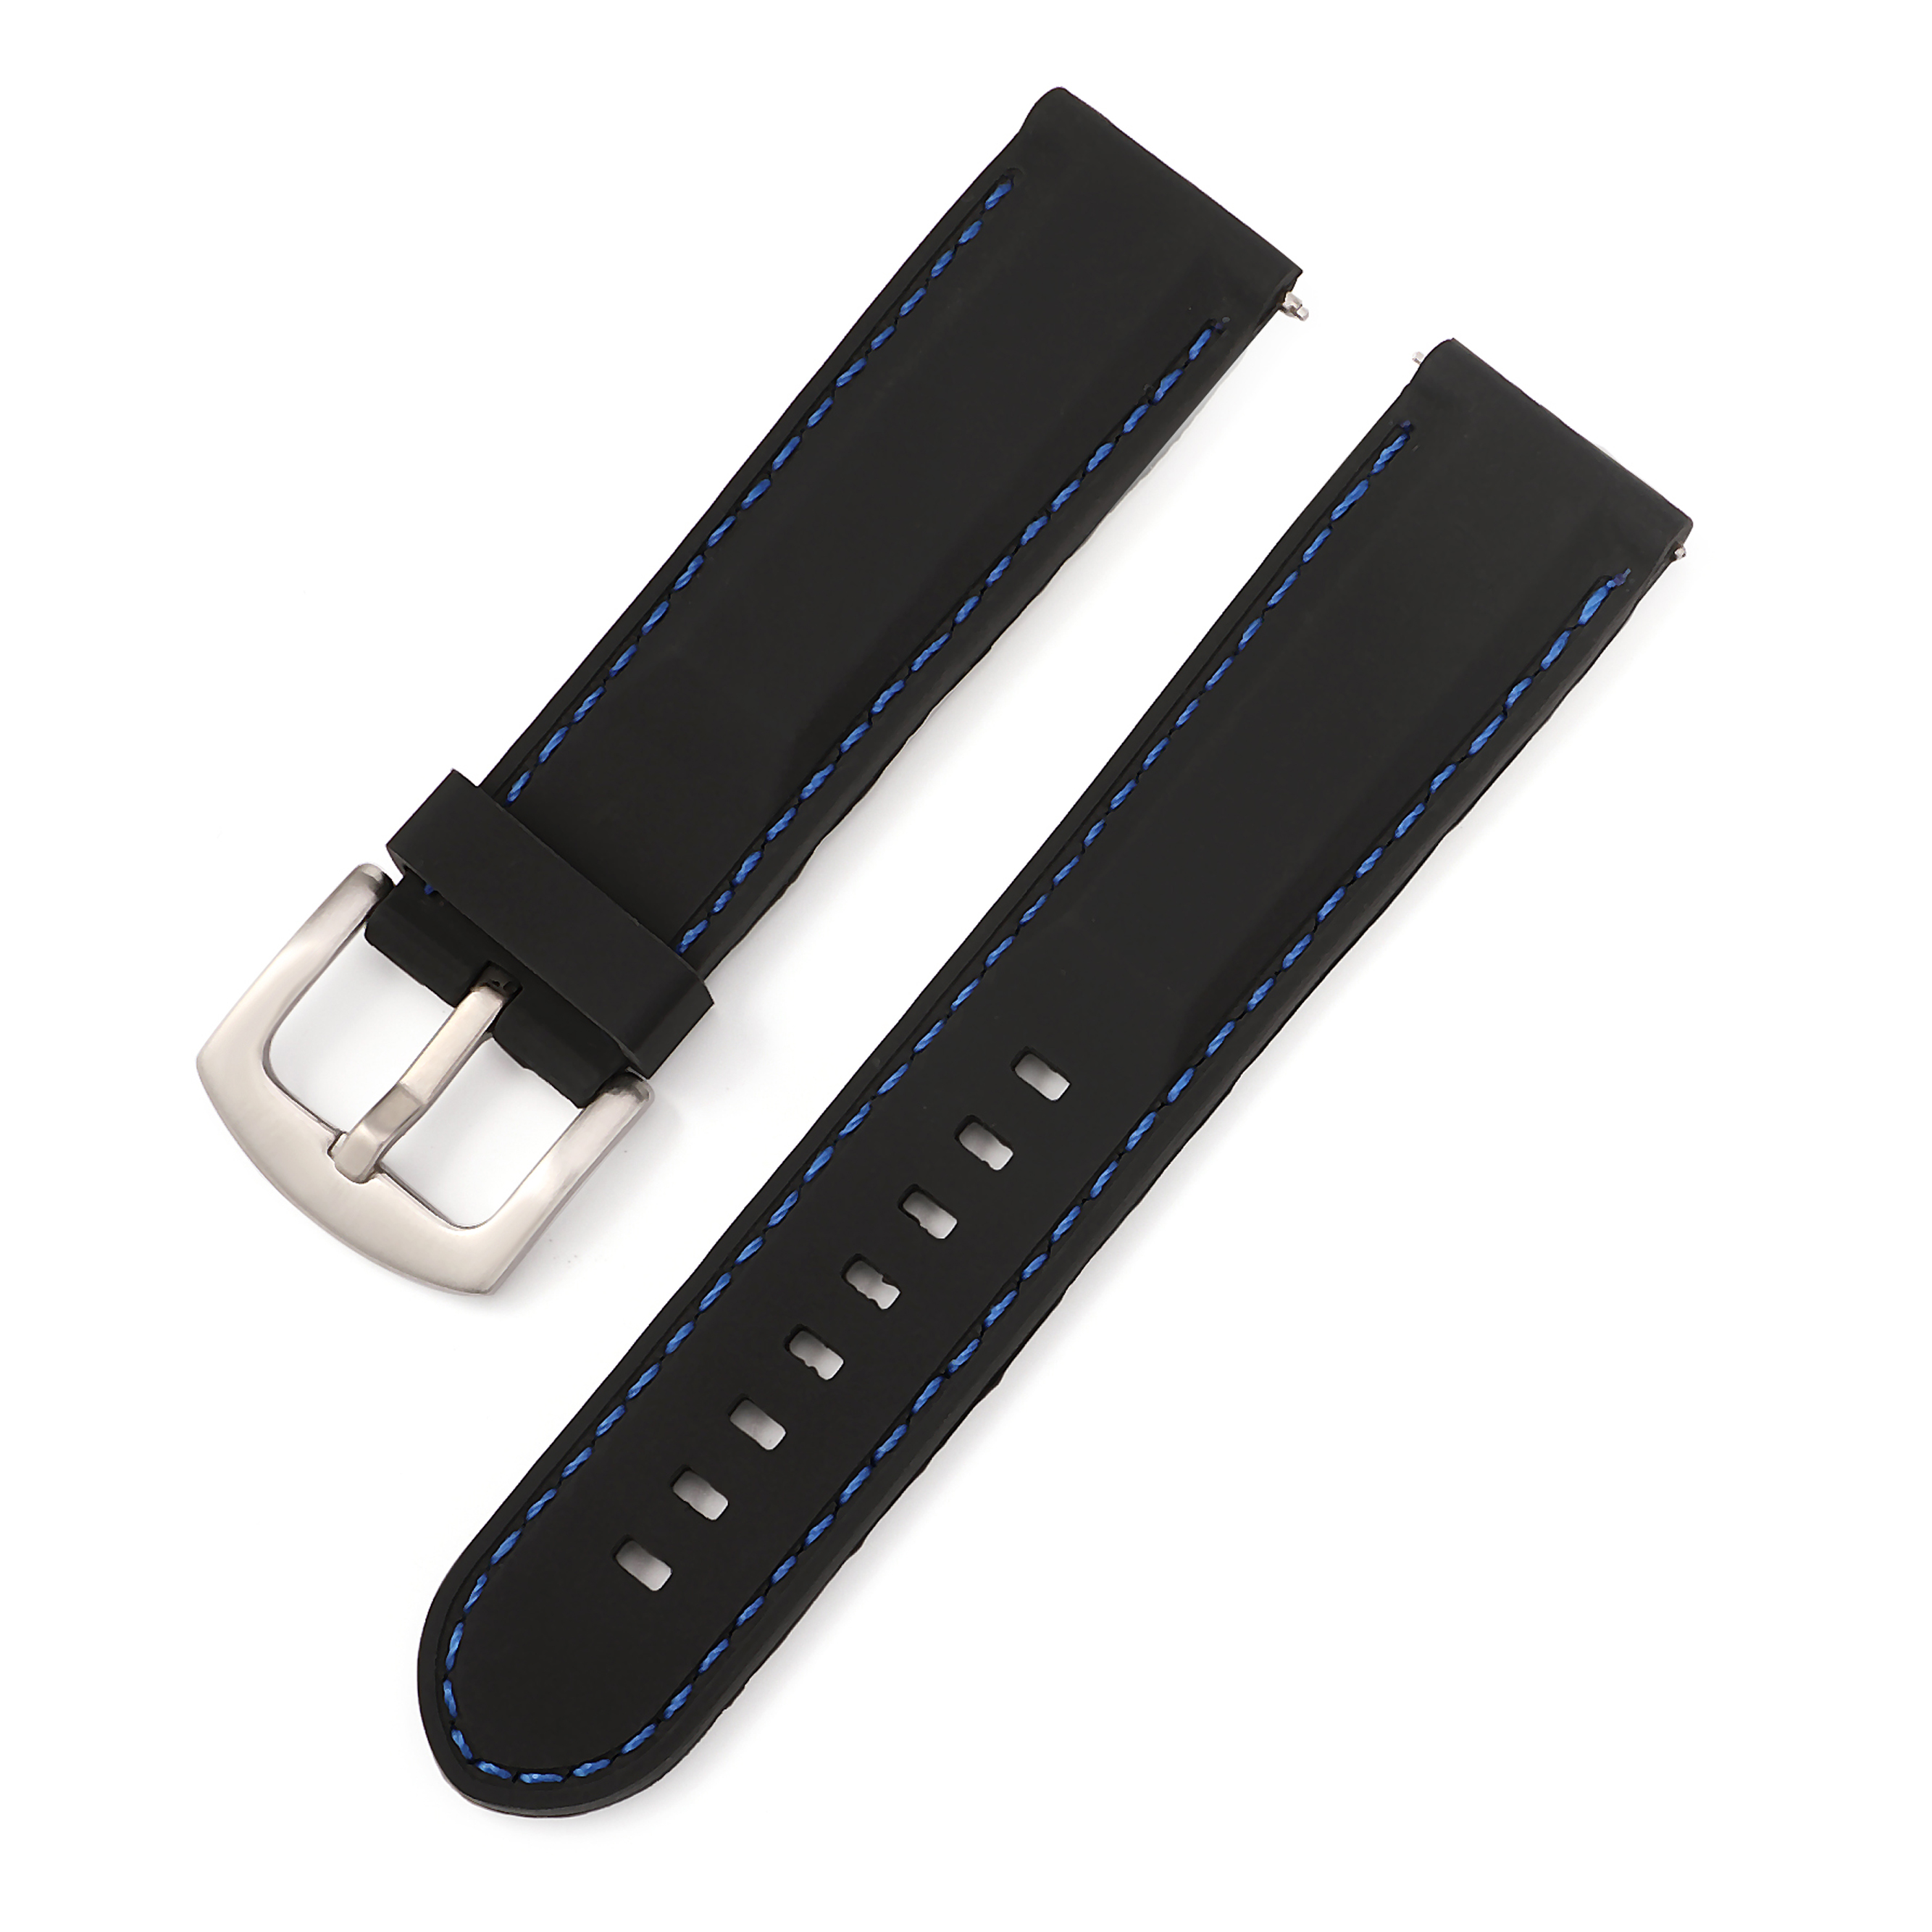 Bakeey-18202224mm-Width-Universal-Pure-Soft-Rubber-Watch-Band-Strap-Replacement-for-Samsung-Galaxy-W-1745923-8